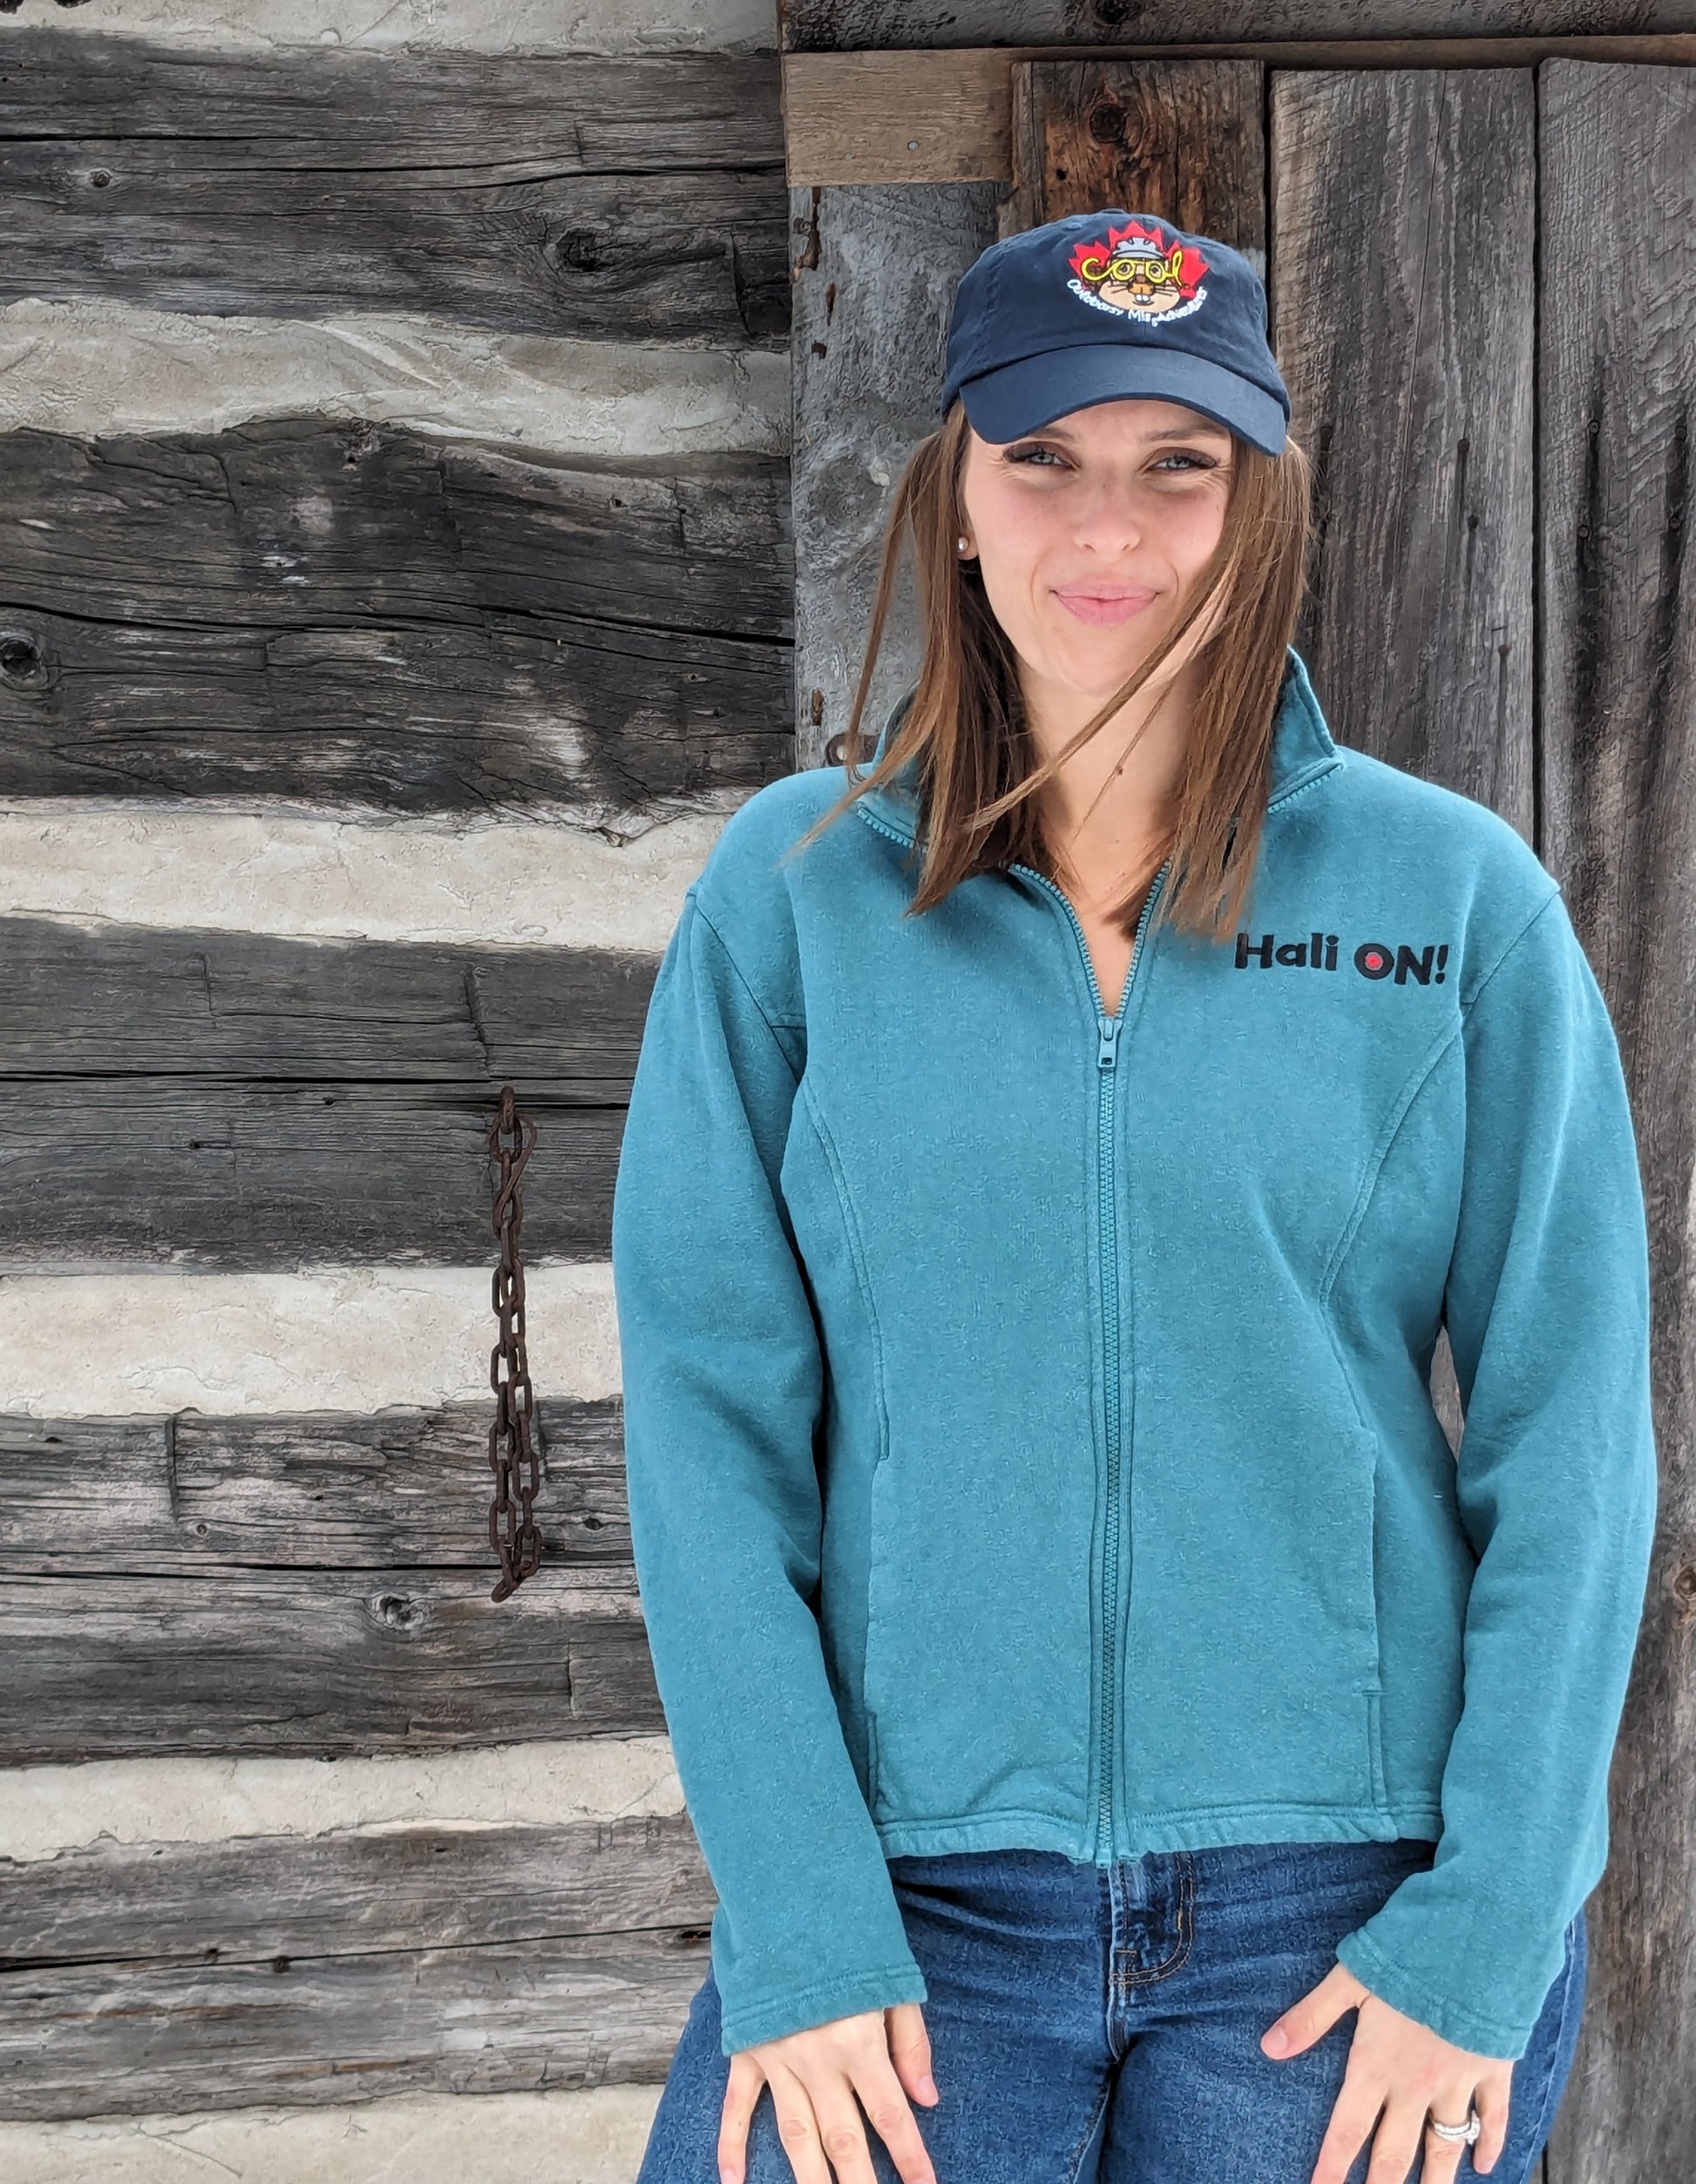 Our model Morgan wearing teal track jacket with HALI ON! embroidered on upper left chest: 'HALI ON!' is another original design from Small Town Natural. This design is a tribute to the small town of Haliburton, Ontario, Canada. Each jacket includes a removable zipper pull made of Pewter hand made in the small town of Tweed, Ontario. 55% Hemp 45% Organic Cotton – Fleece